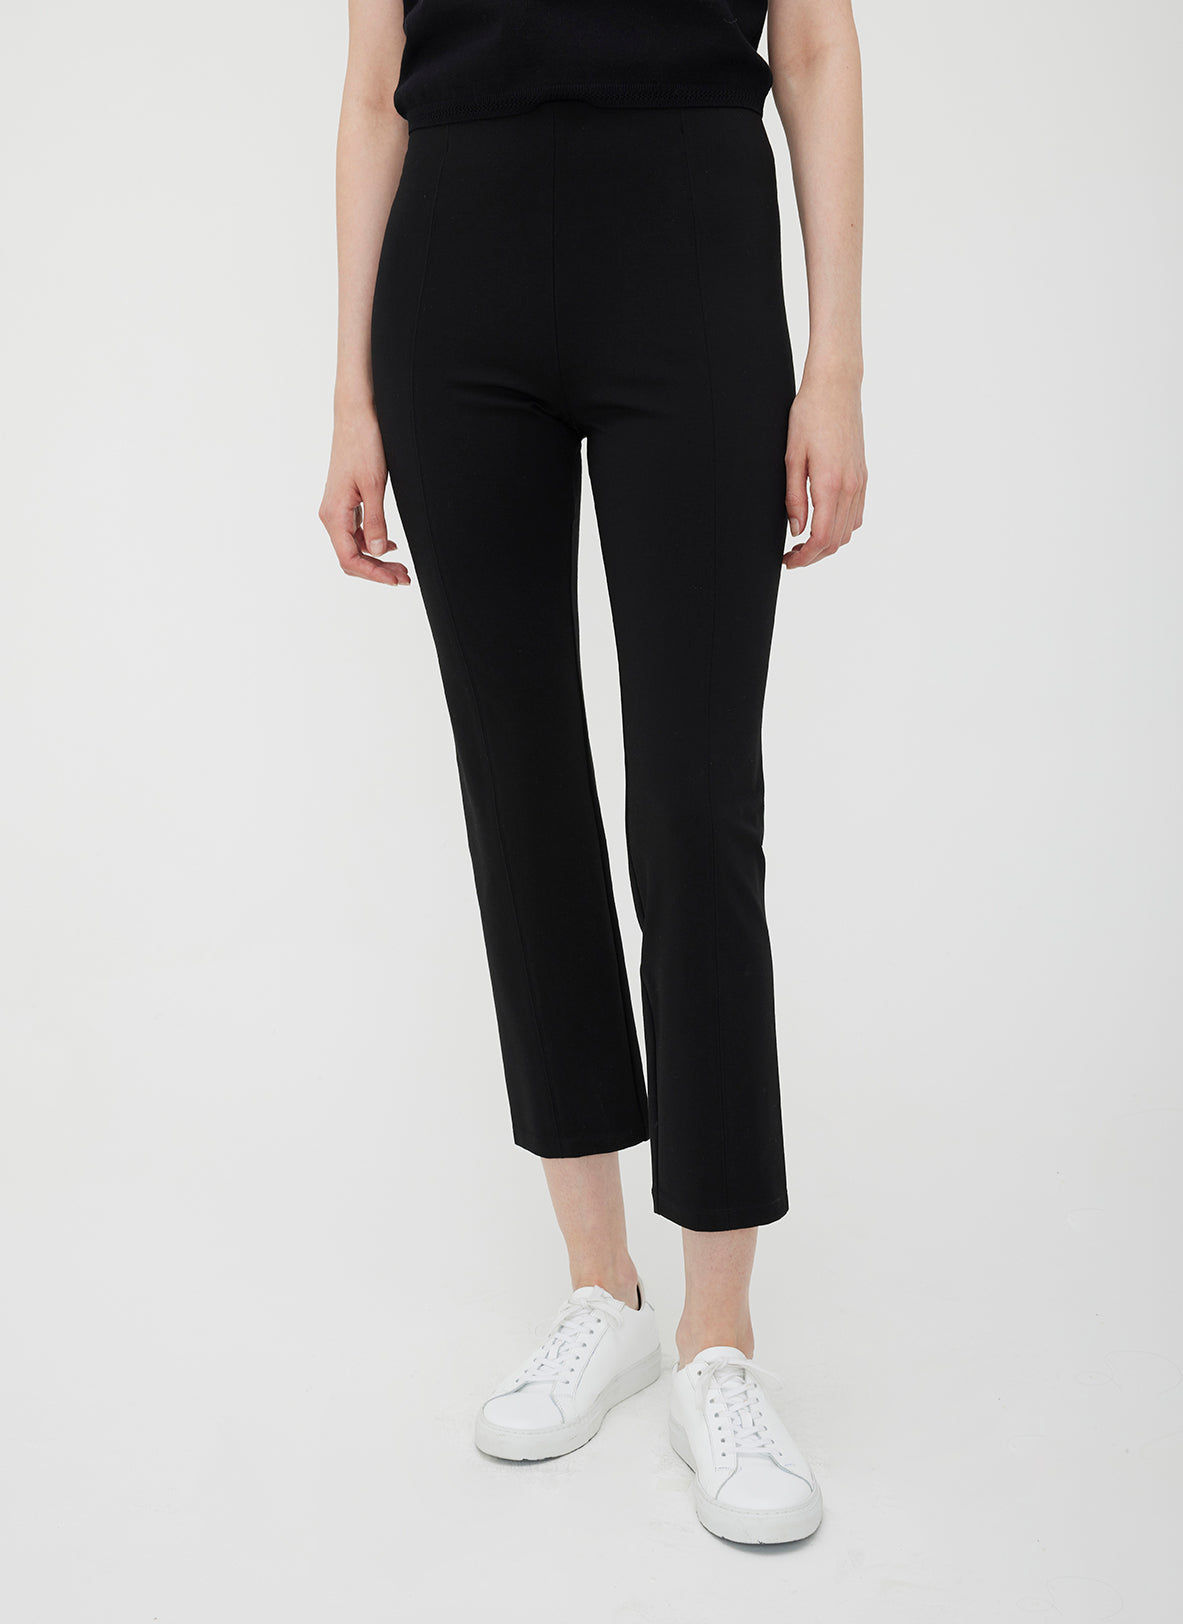 5 Reasons You need black ponte pants - Women Living Well After 50